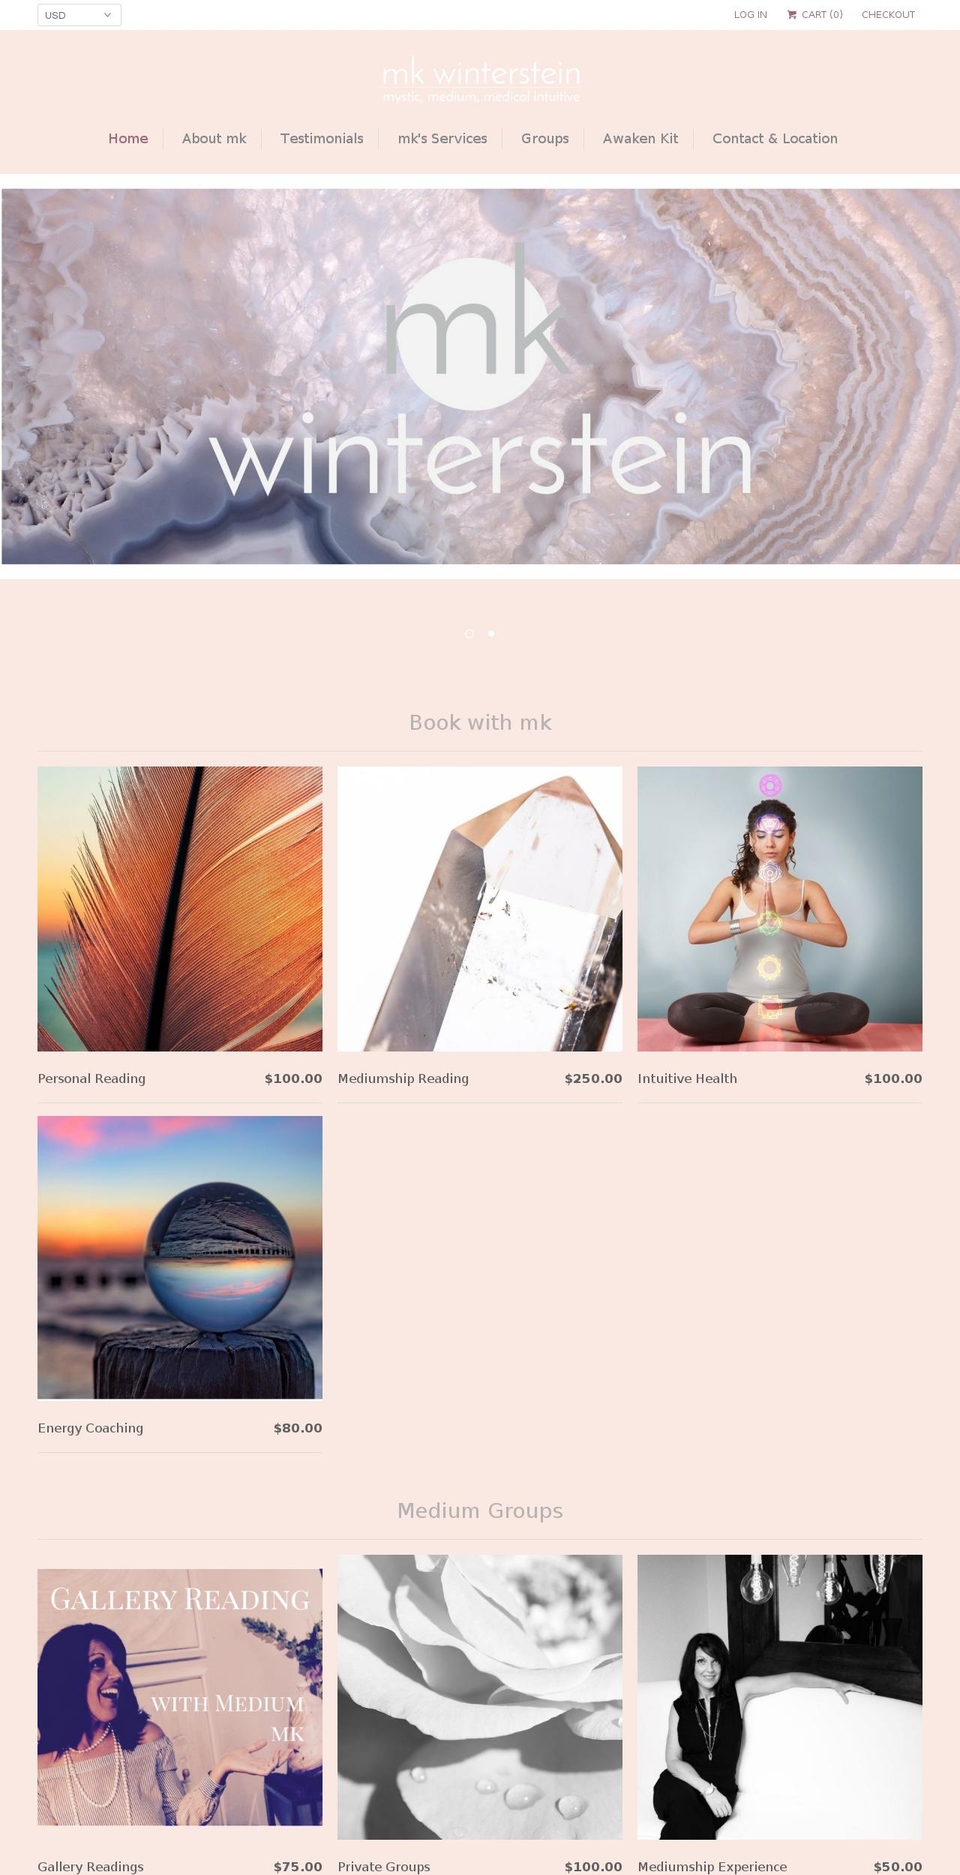 Molla Shopify theme site example mkwinterstein.com